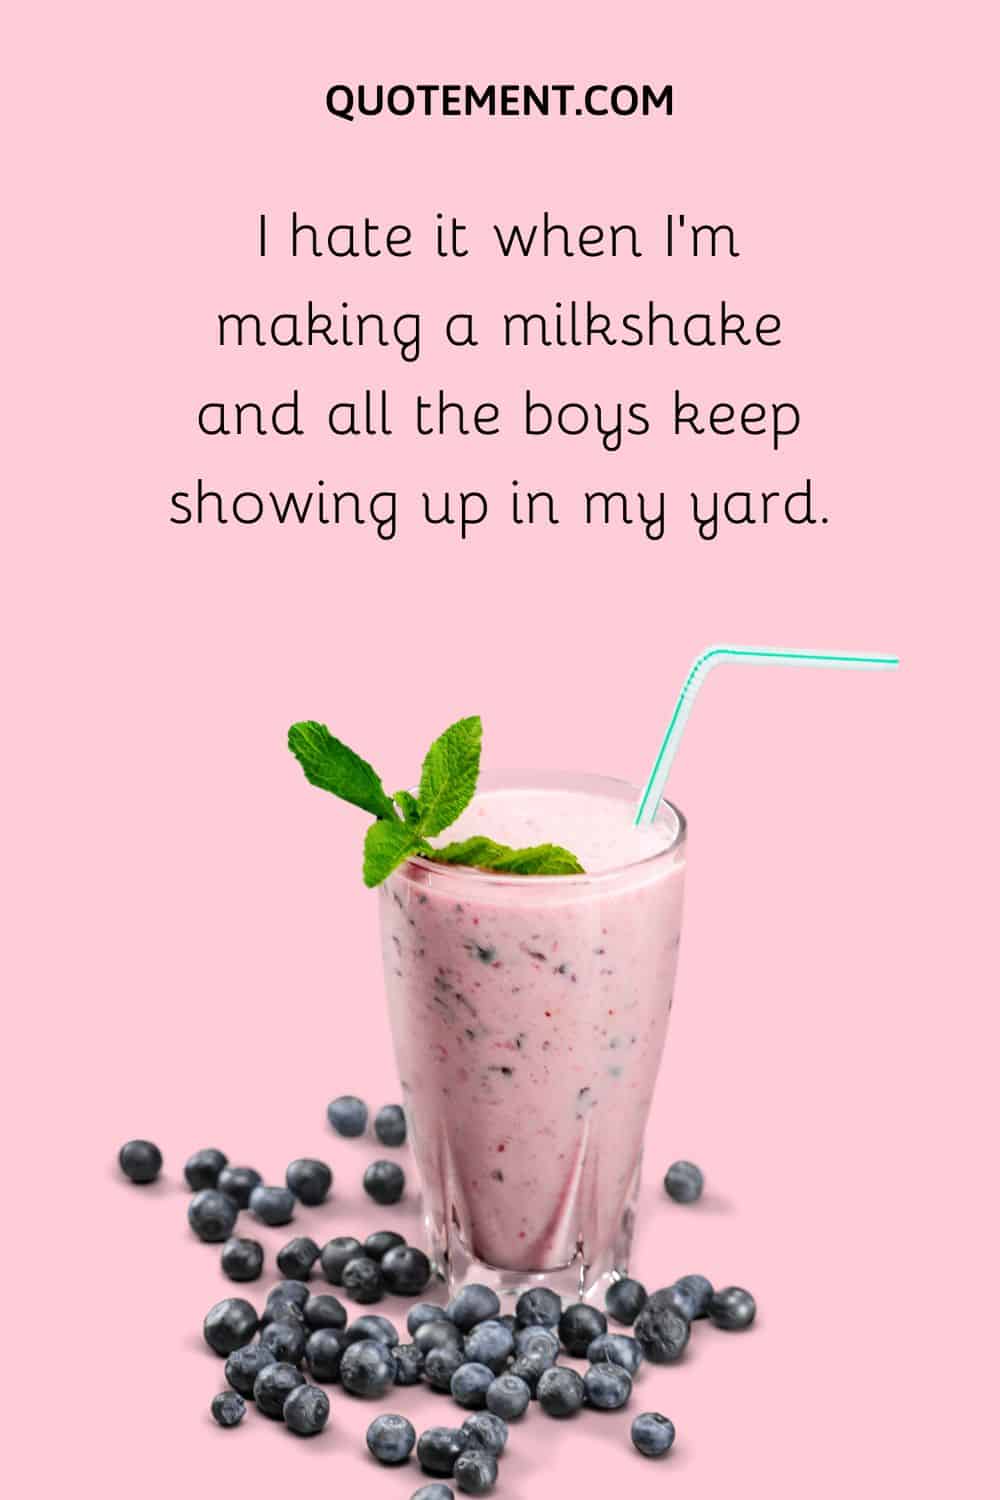 I hate it when I’m making a milkshake and all the boys keep showing up in my yard.